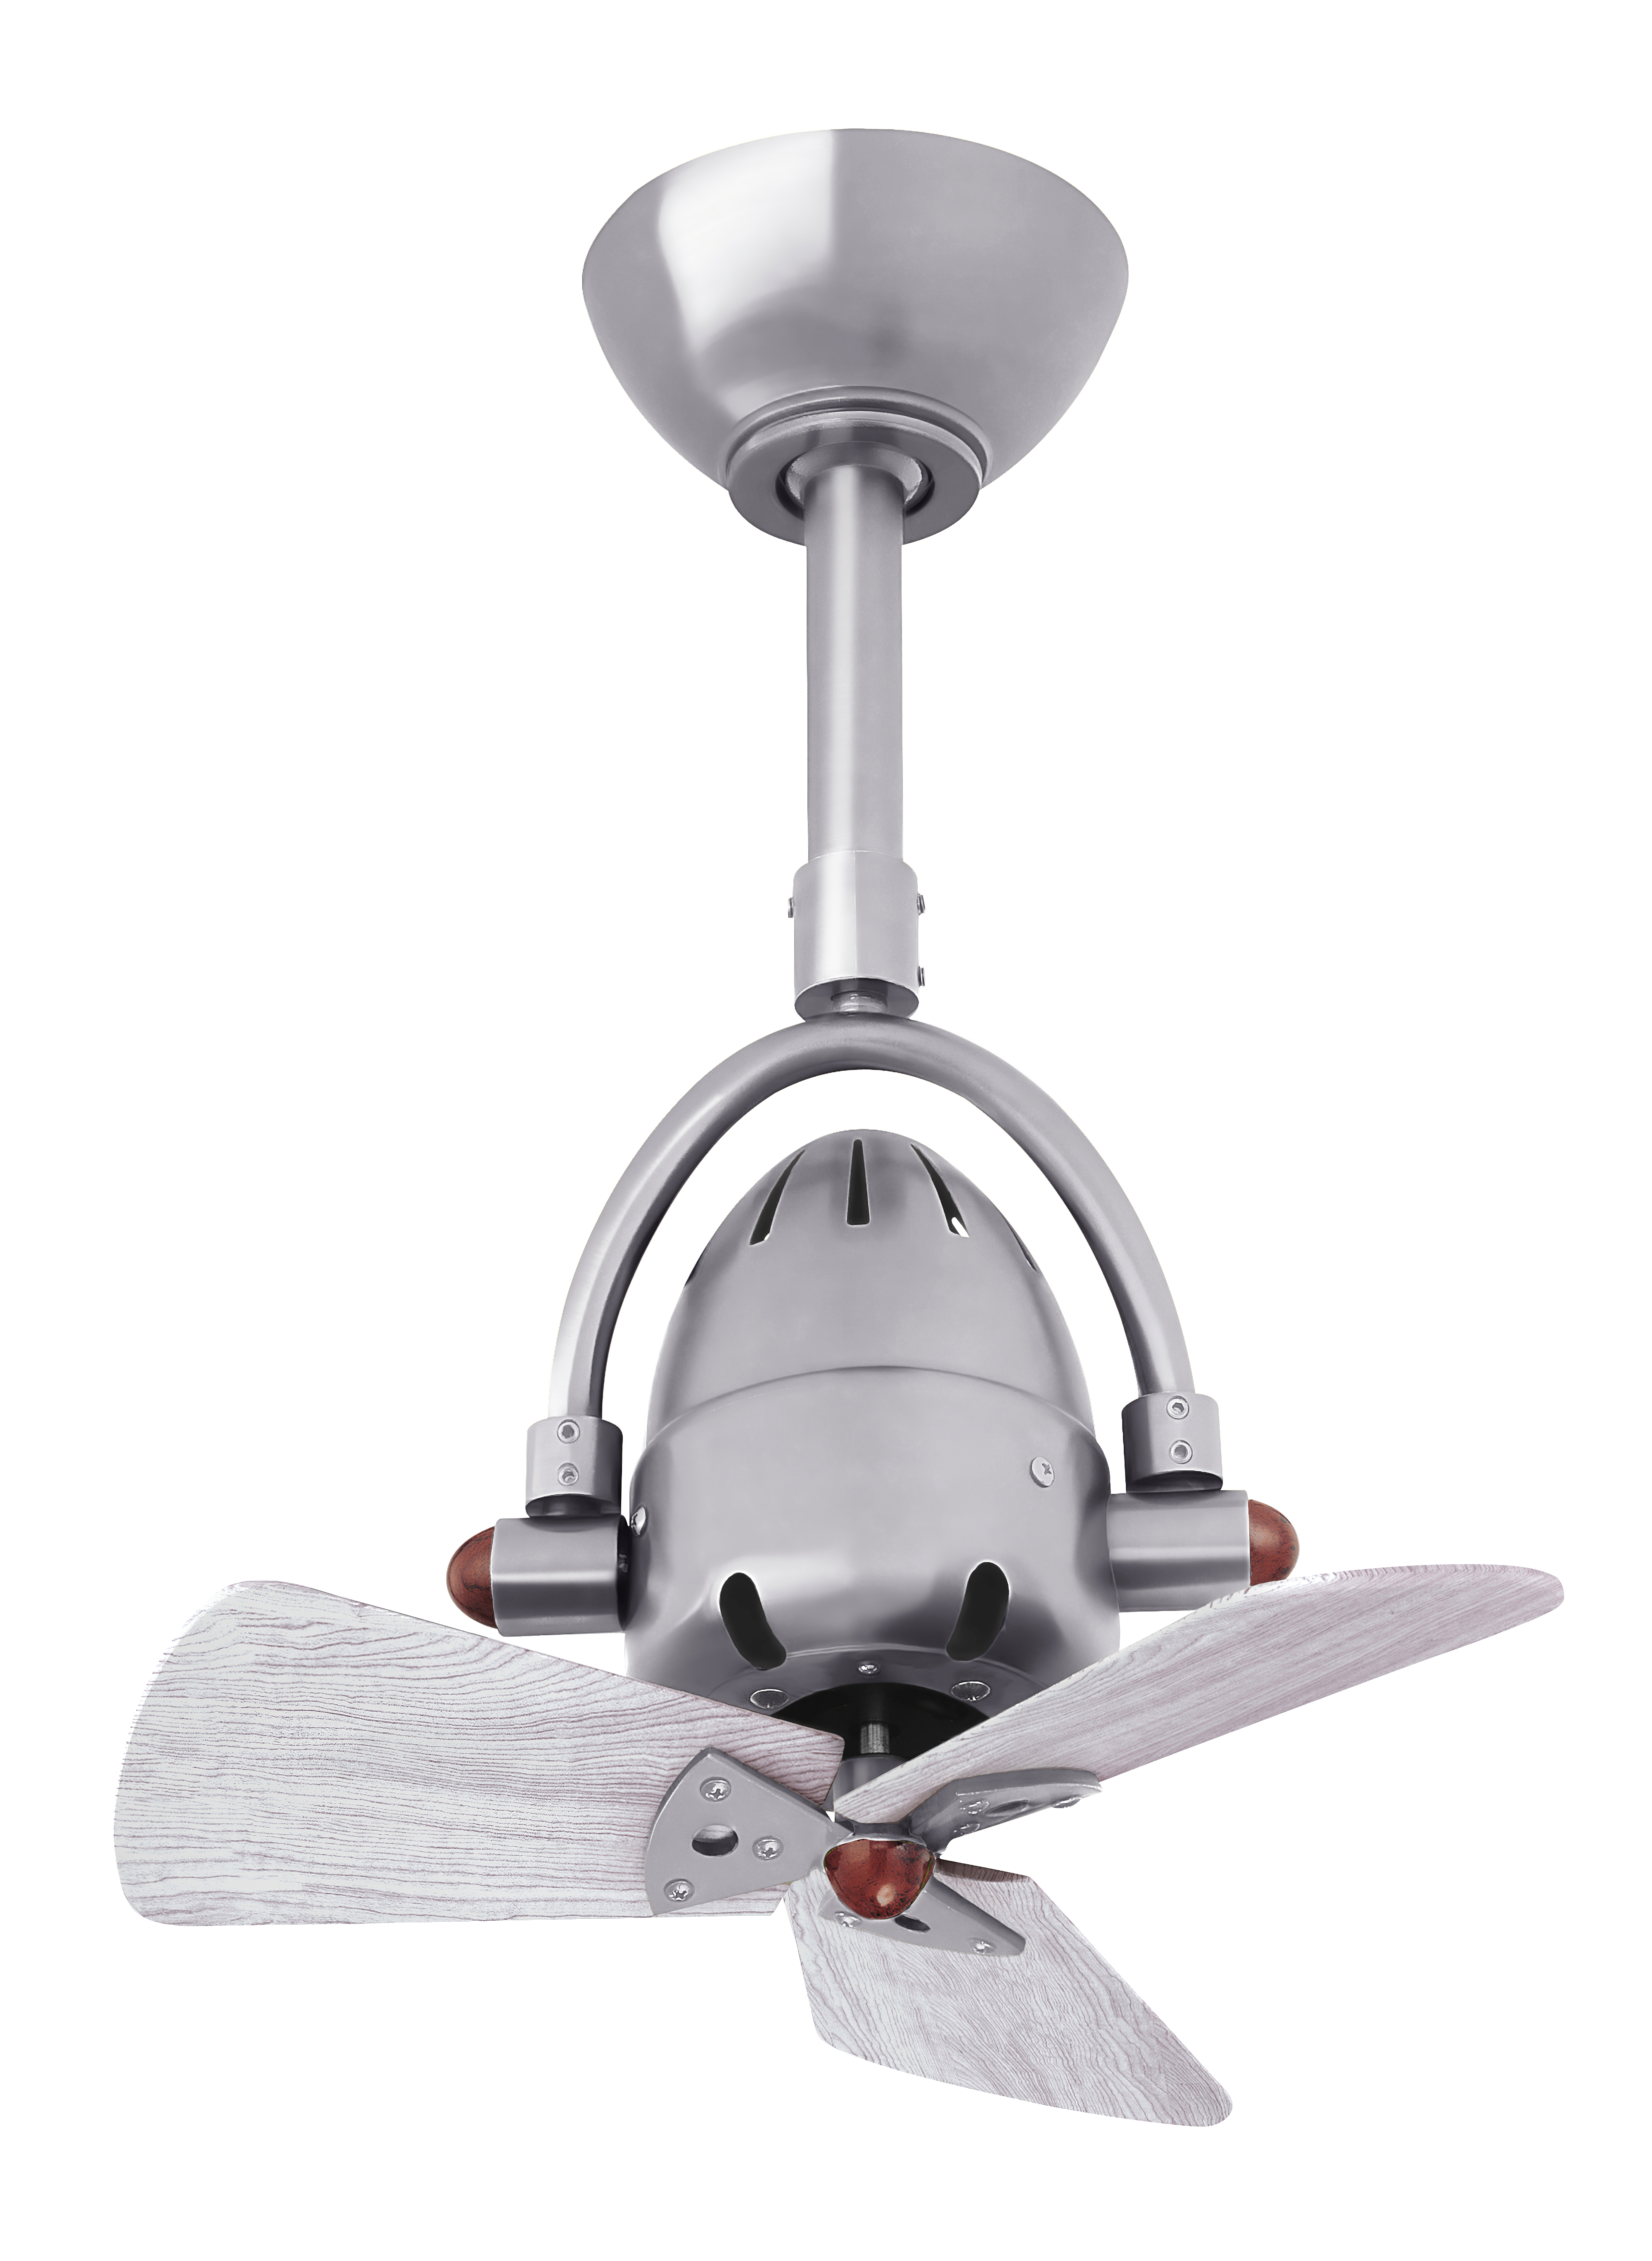 Diane ceiling fan in Brushed Nickel with Barn Wood blades